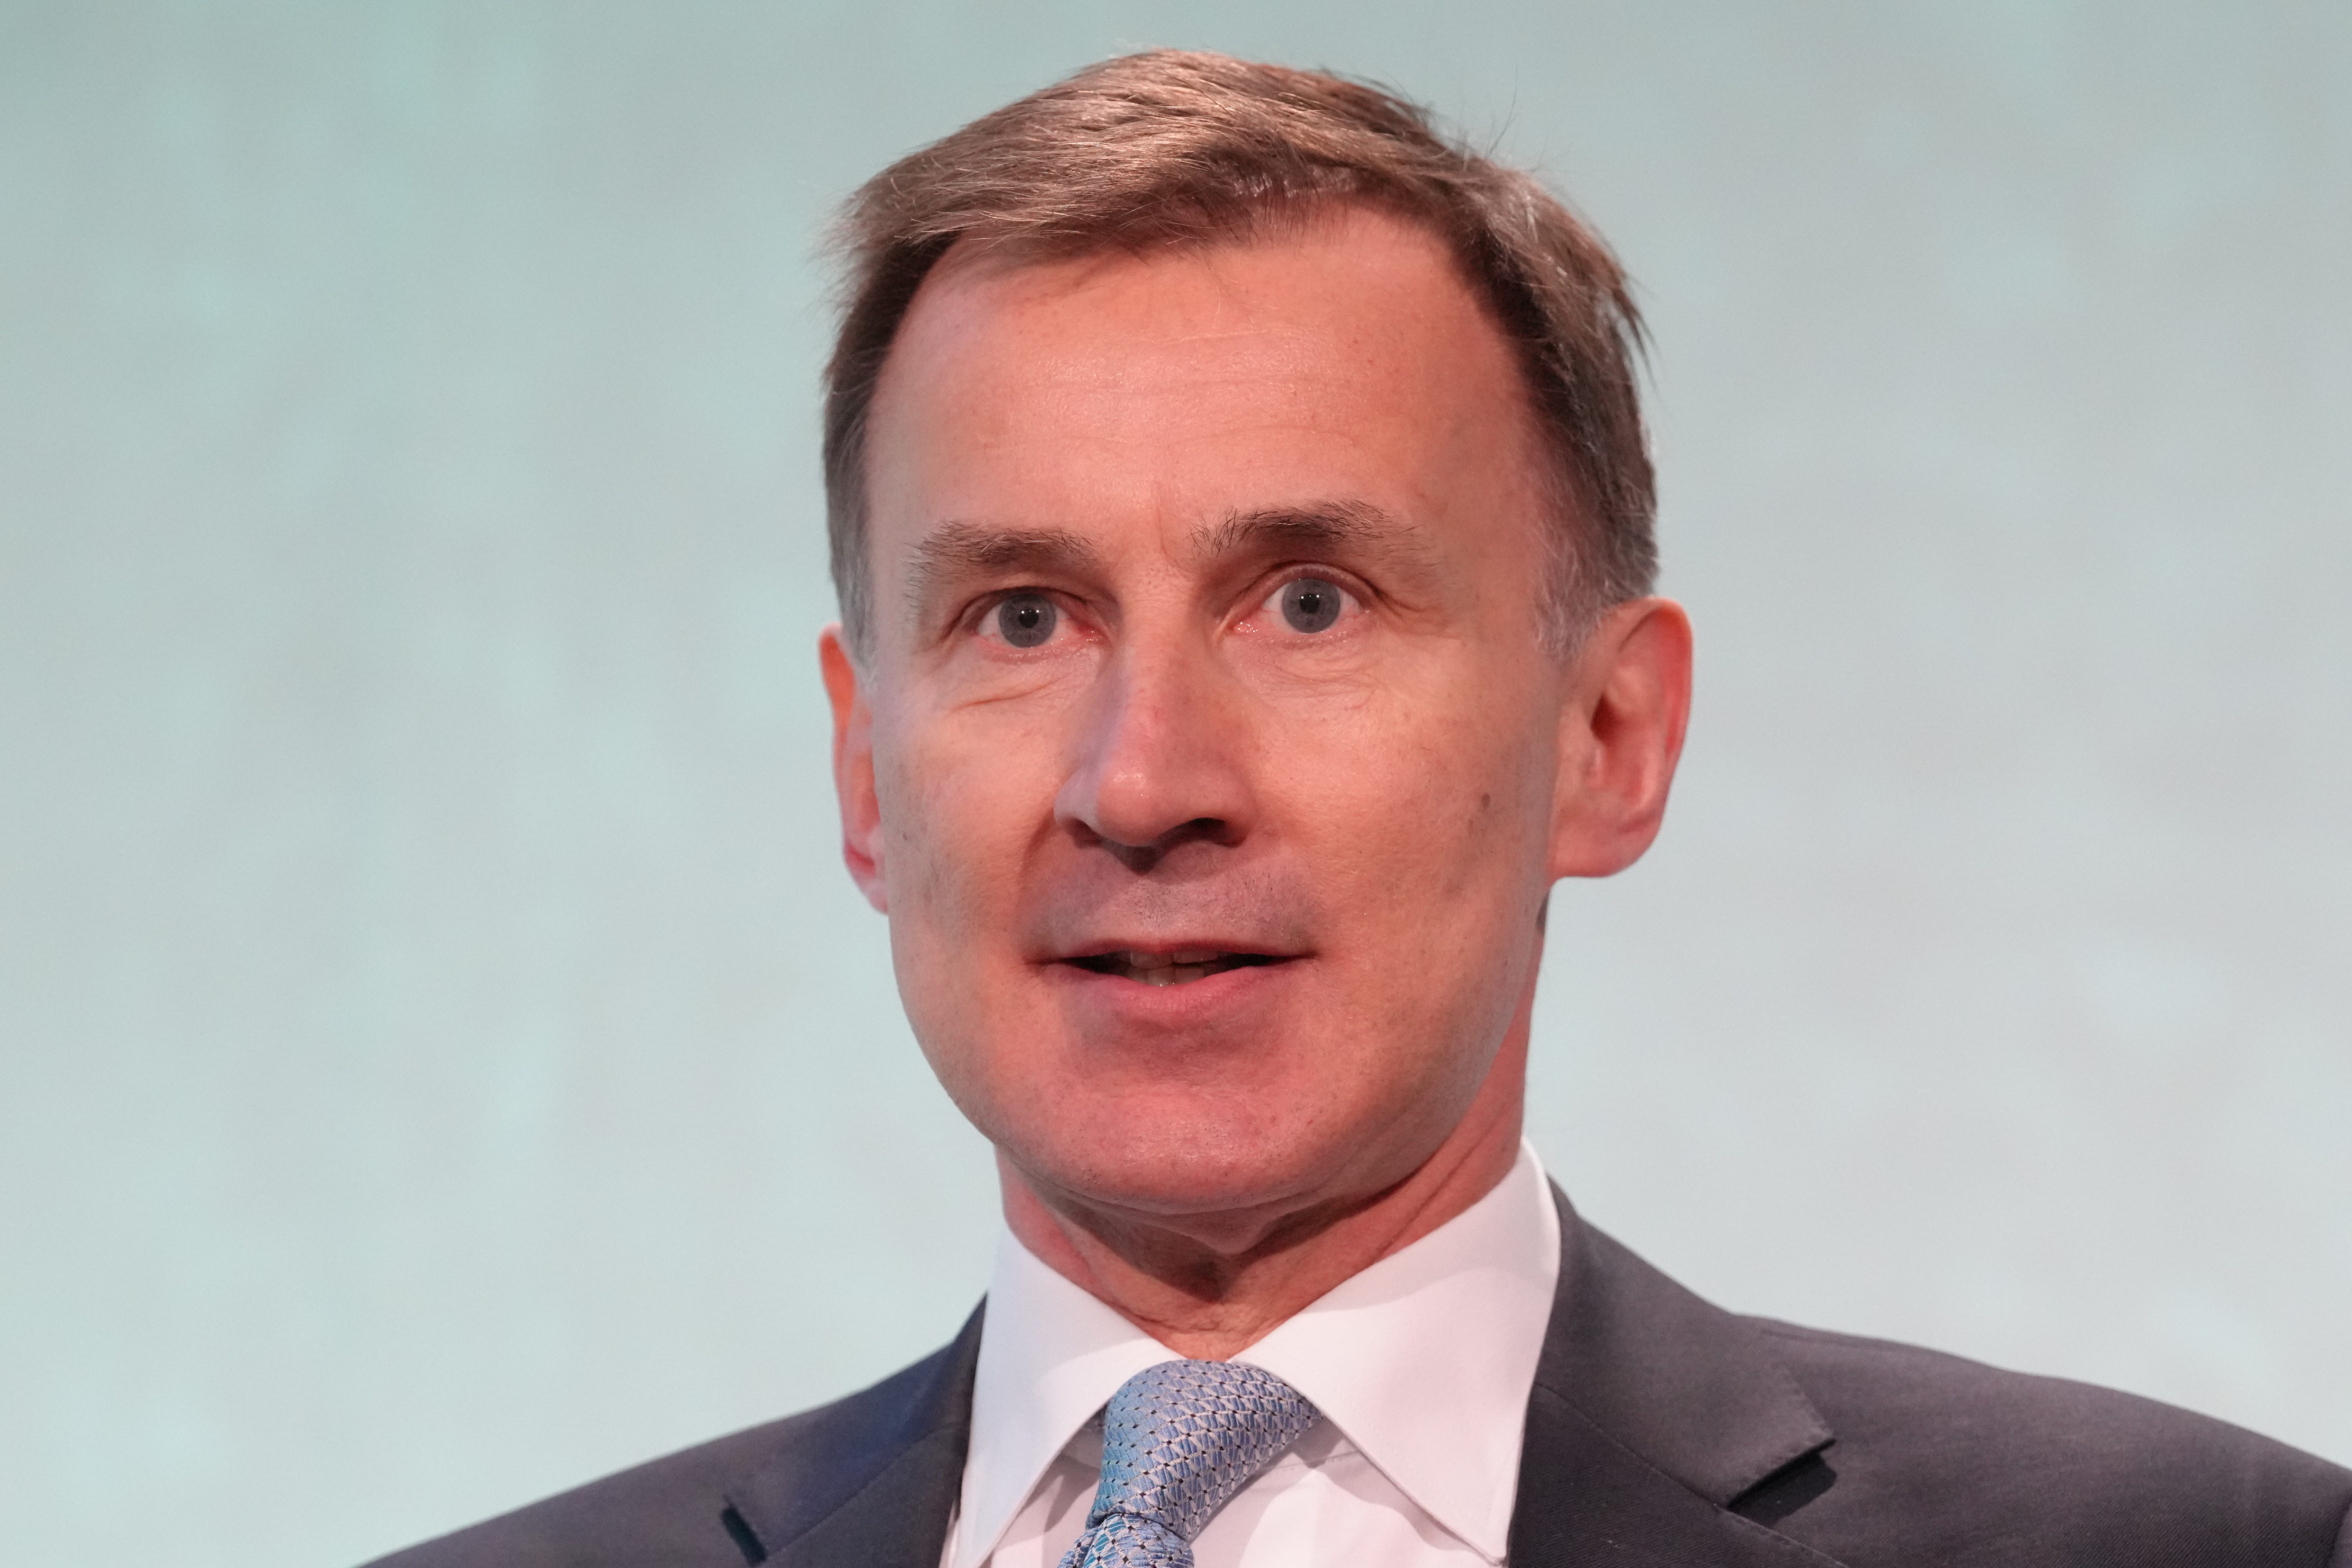 The UK should ‘absolutely’ be concerned about the threat of Isis, chancellor Jeremy Hunt said yesterday